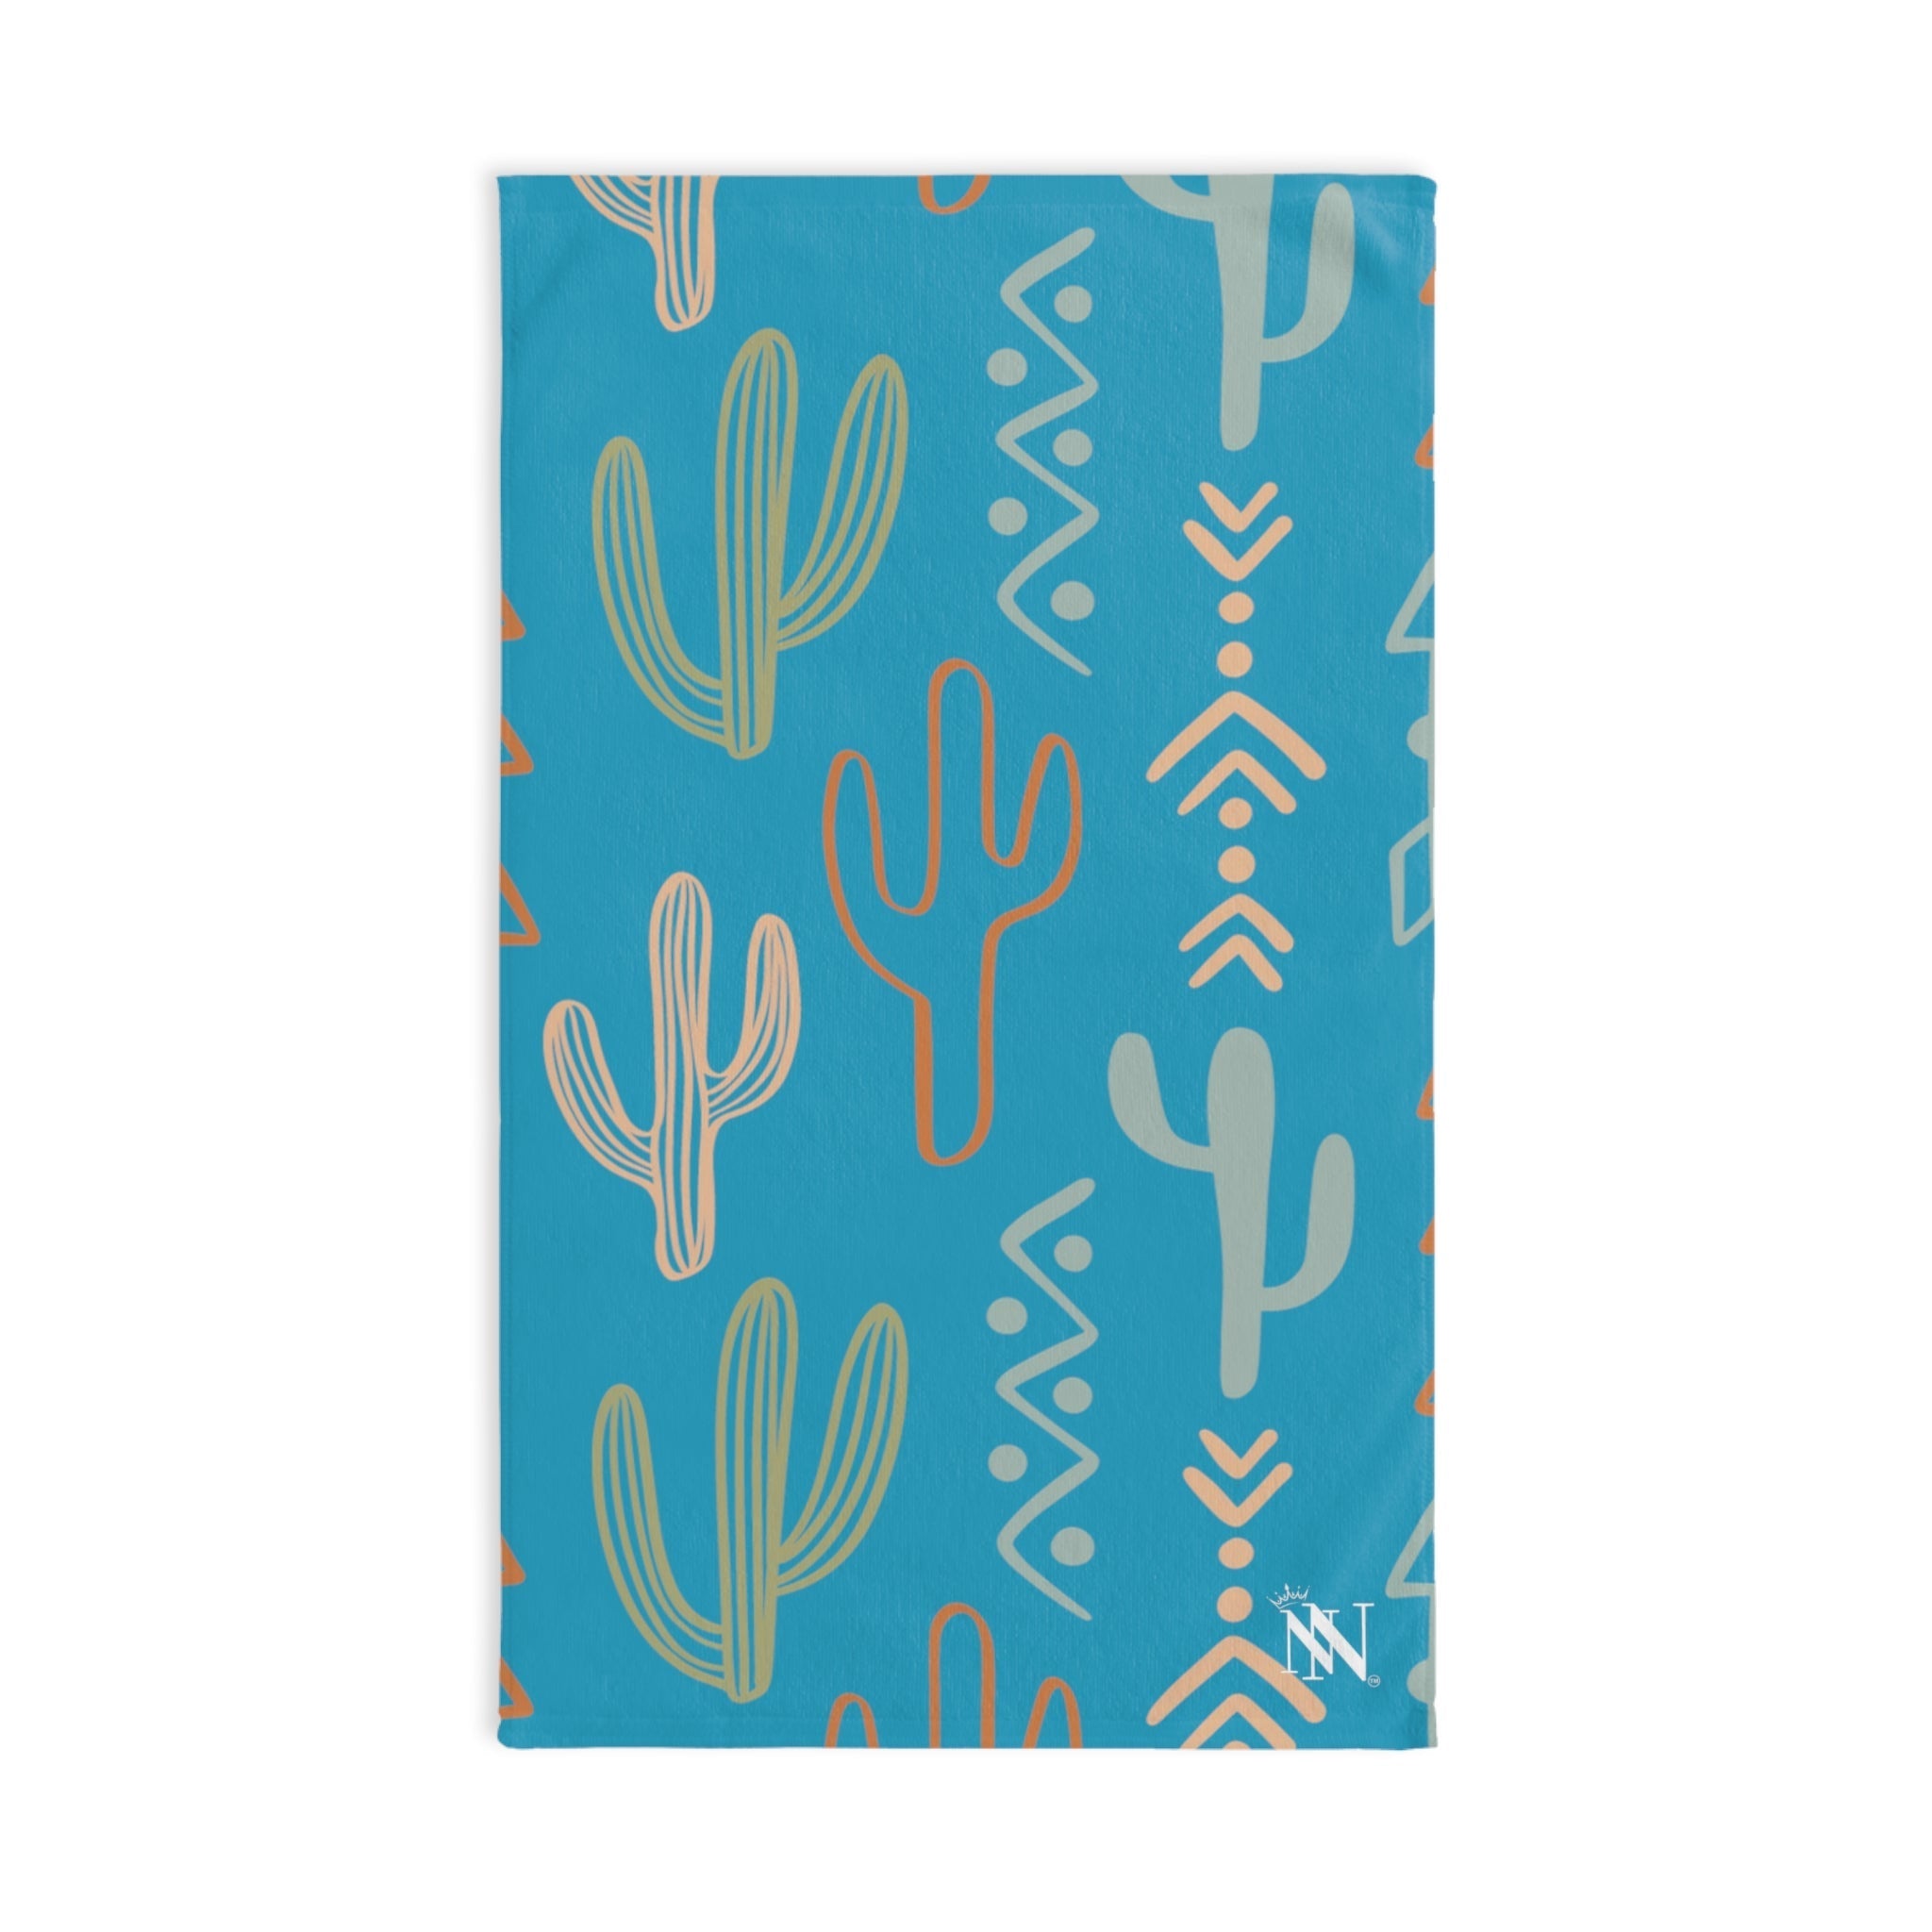 Cactus Western Teal | Novelty Gifts for Boyfriend, Funny Towel Romantic Gift for Wedding Couple Fiance First Year Anniversary Valentines, Party Gag Gifts, Joke Humor Cloth for Husband Men BF NECTAR NAPKINS